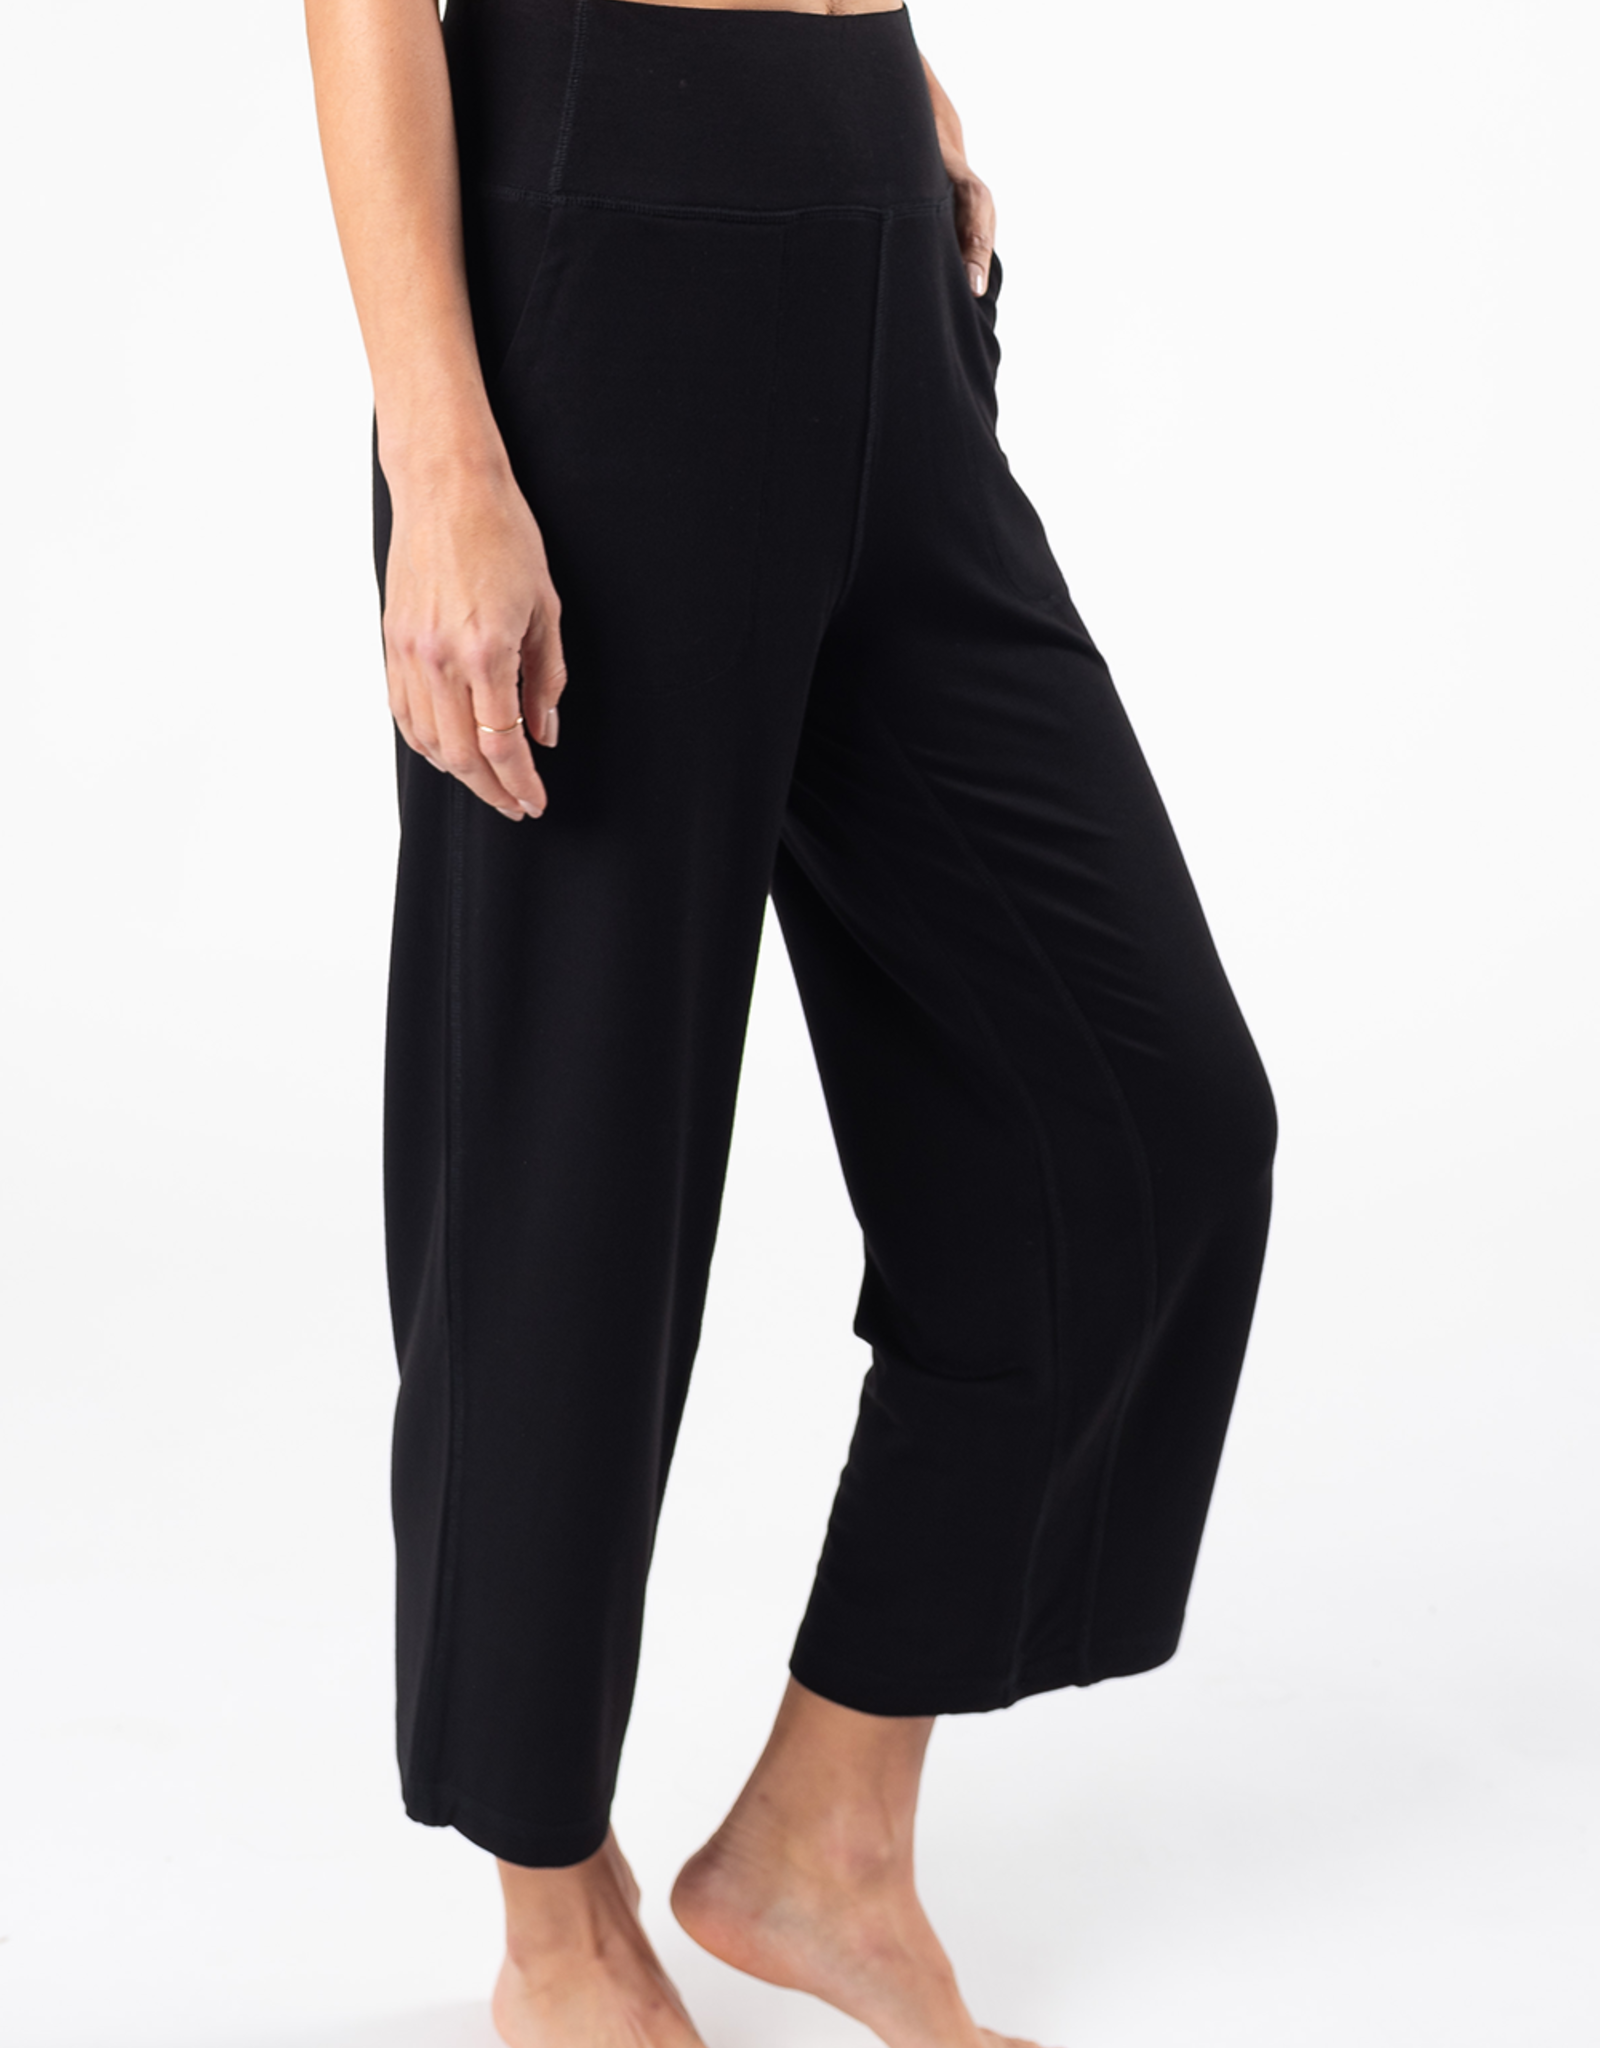 Terrera Dion Cropped Pant - 3133